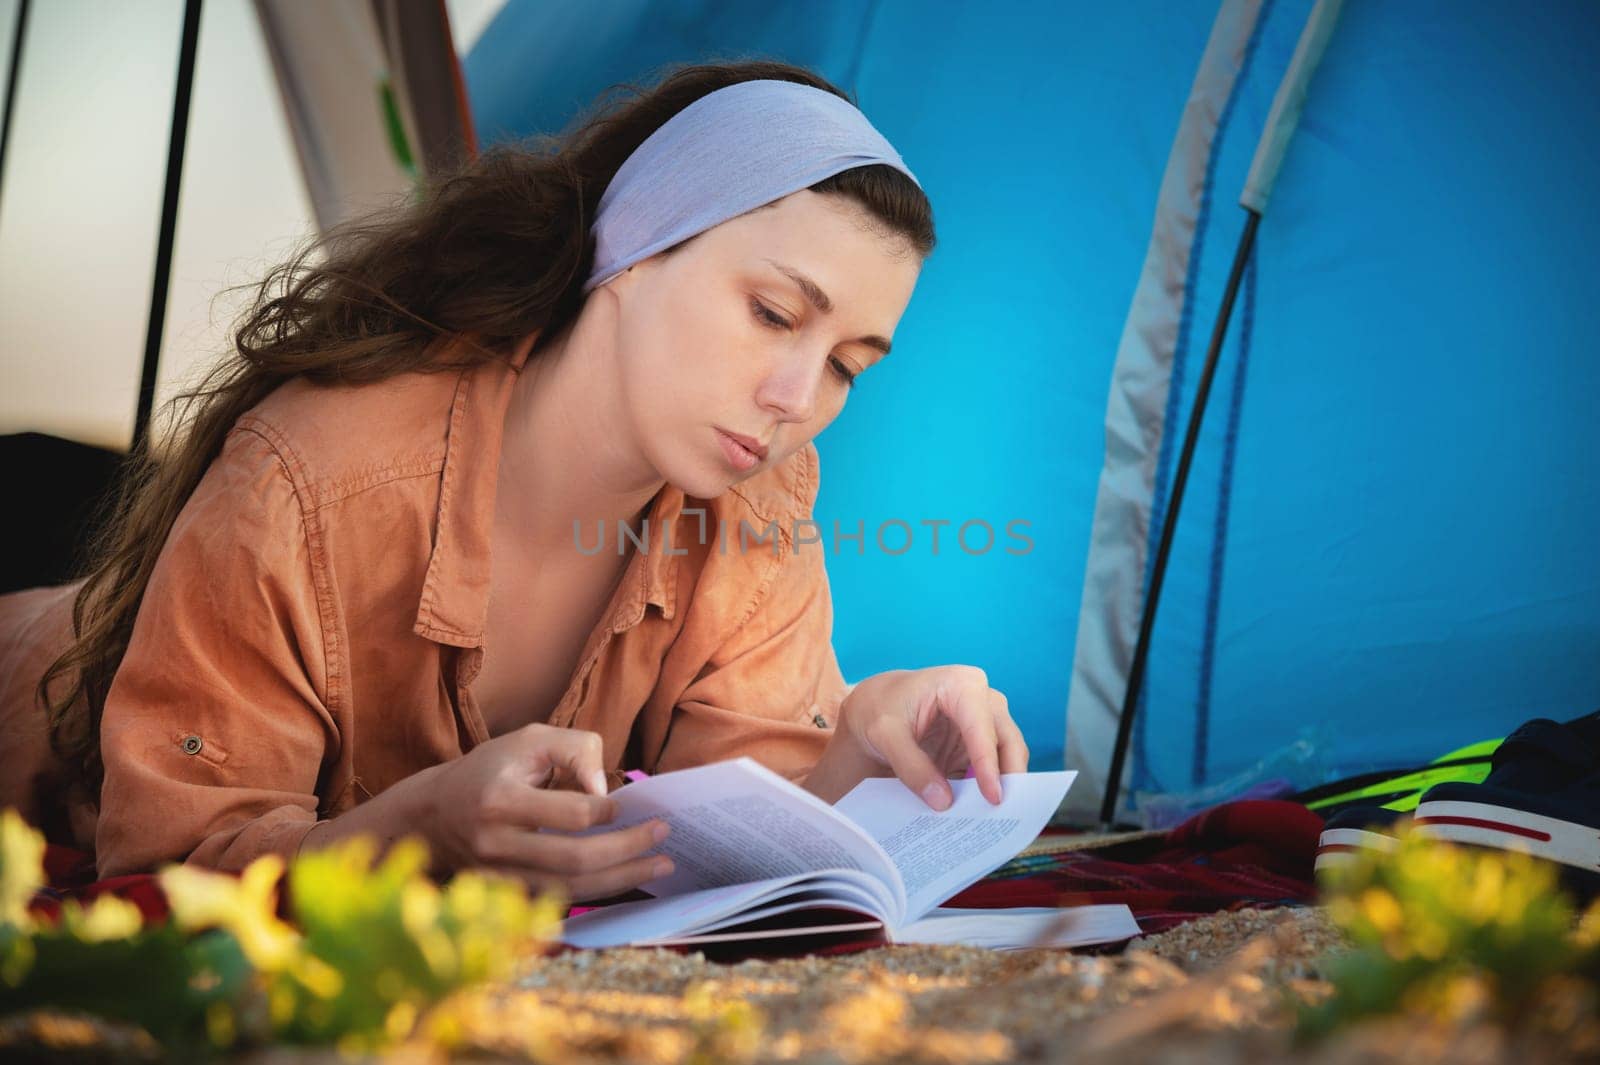 Caucasian woman thoughtfully reading a book on a beautiful beach. Beautiful girl in casual clothes looks at a book while lying on the sand, bottom view from ground level by yanik88